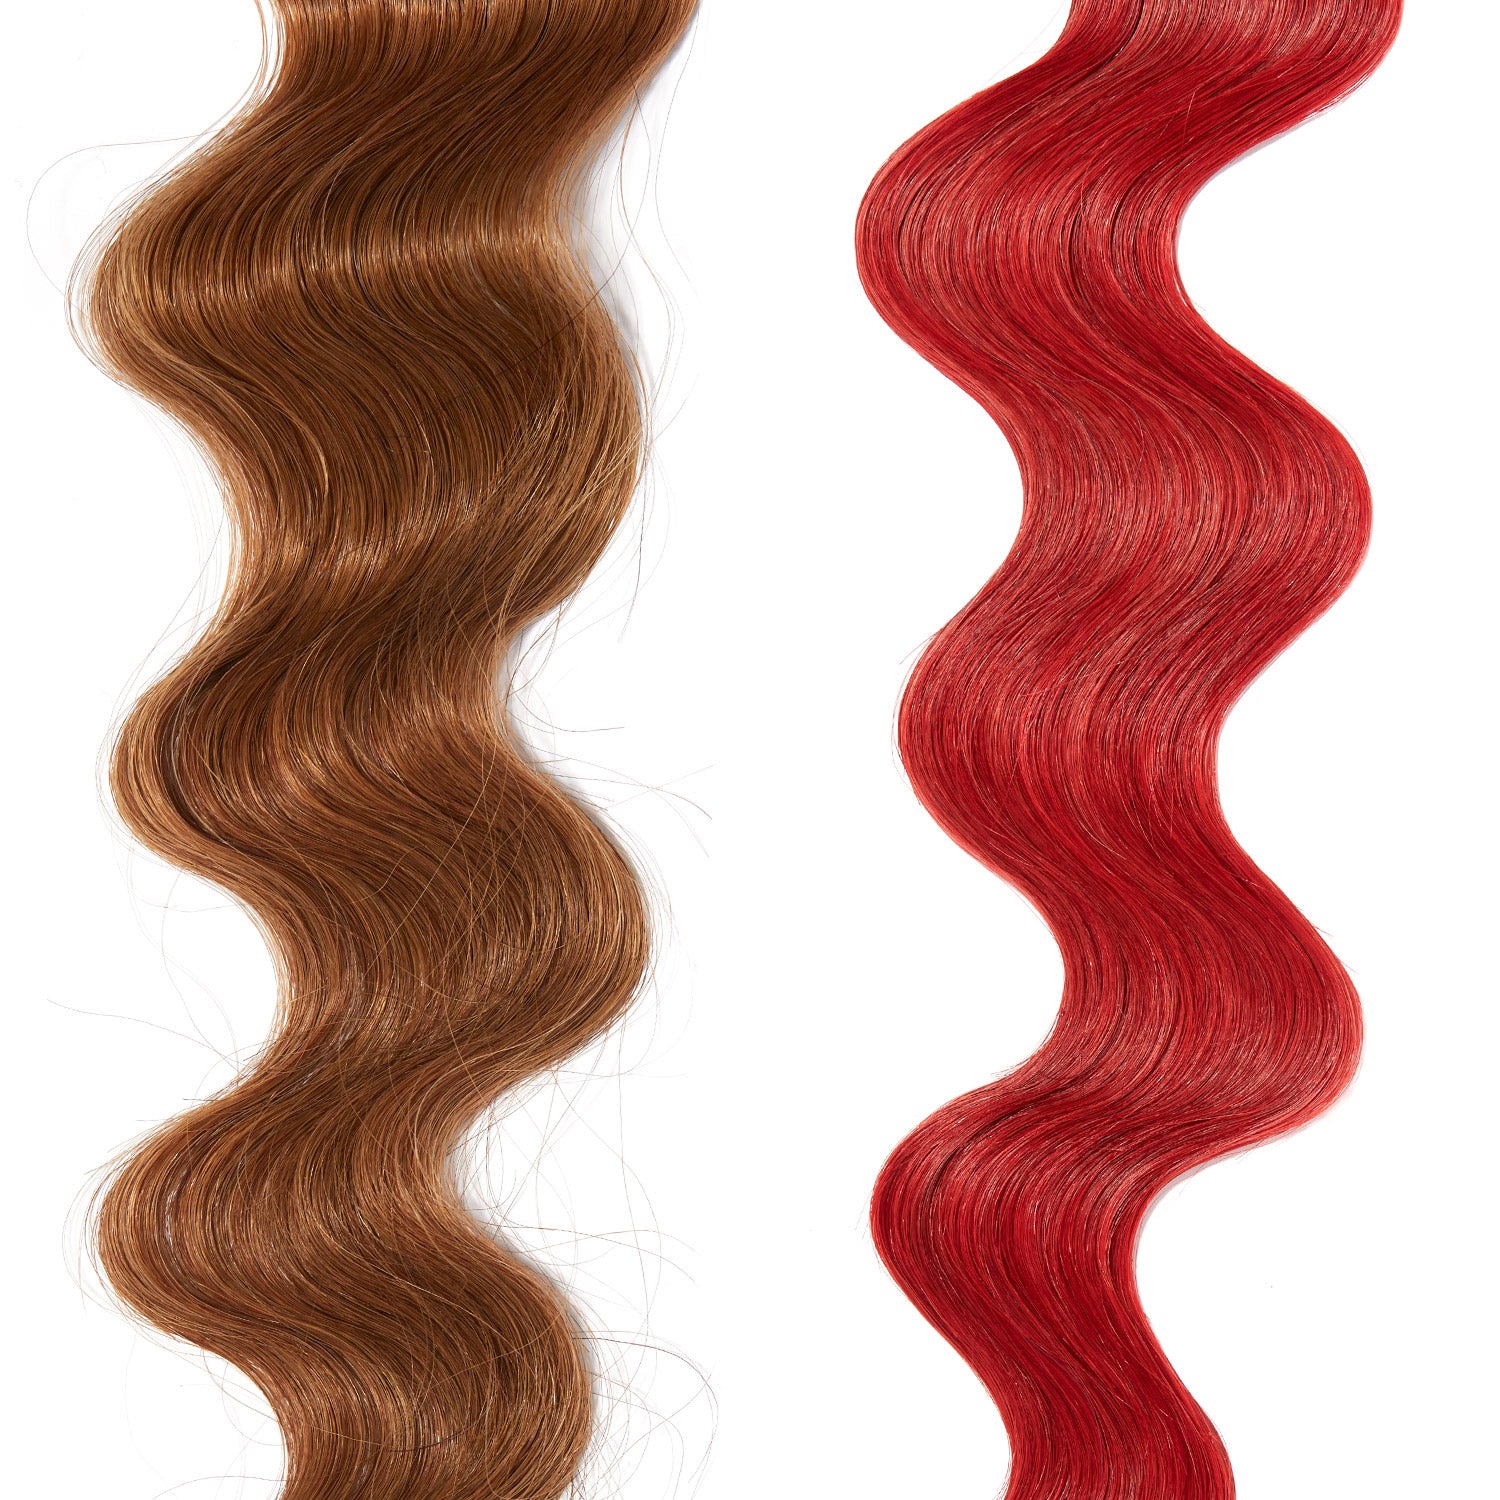 brown and dark red hair